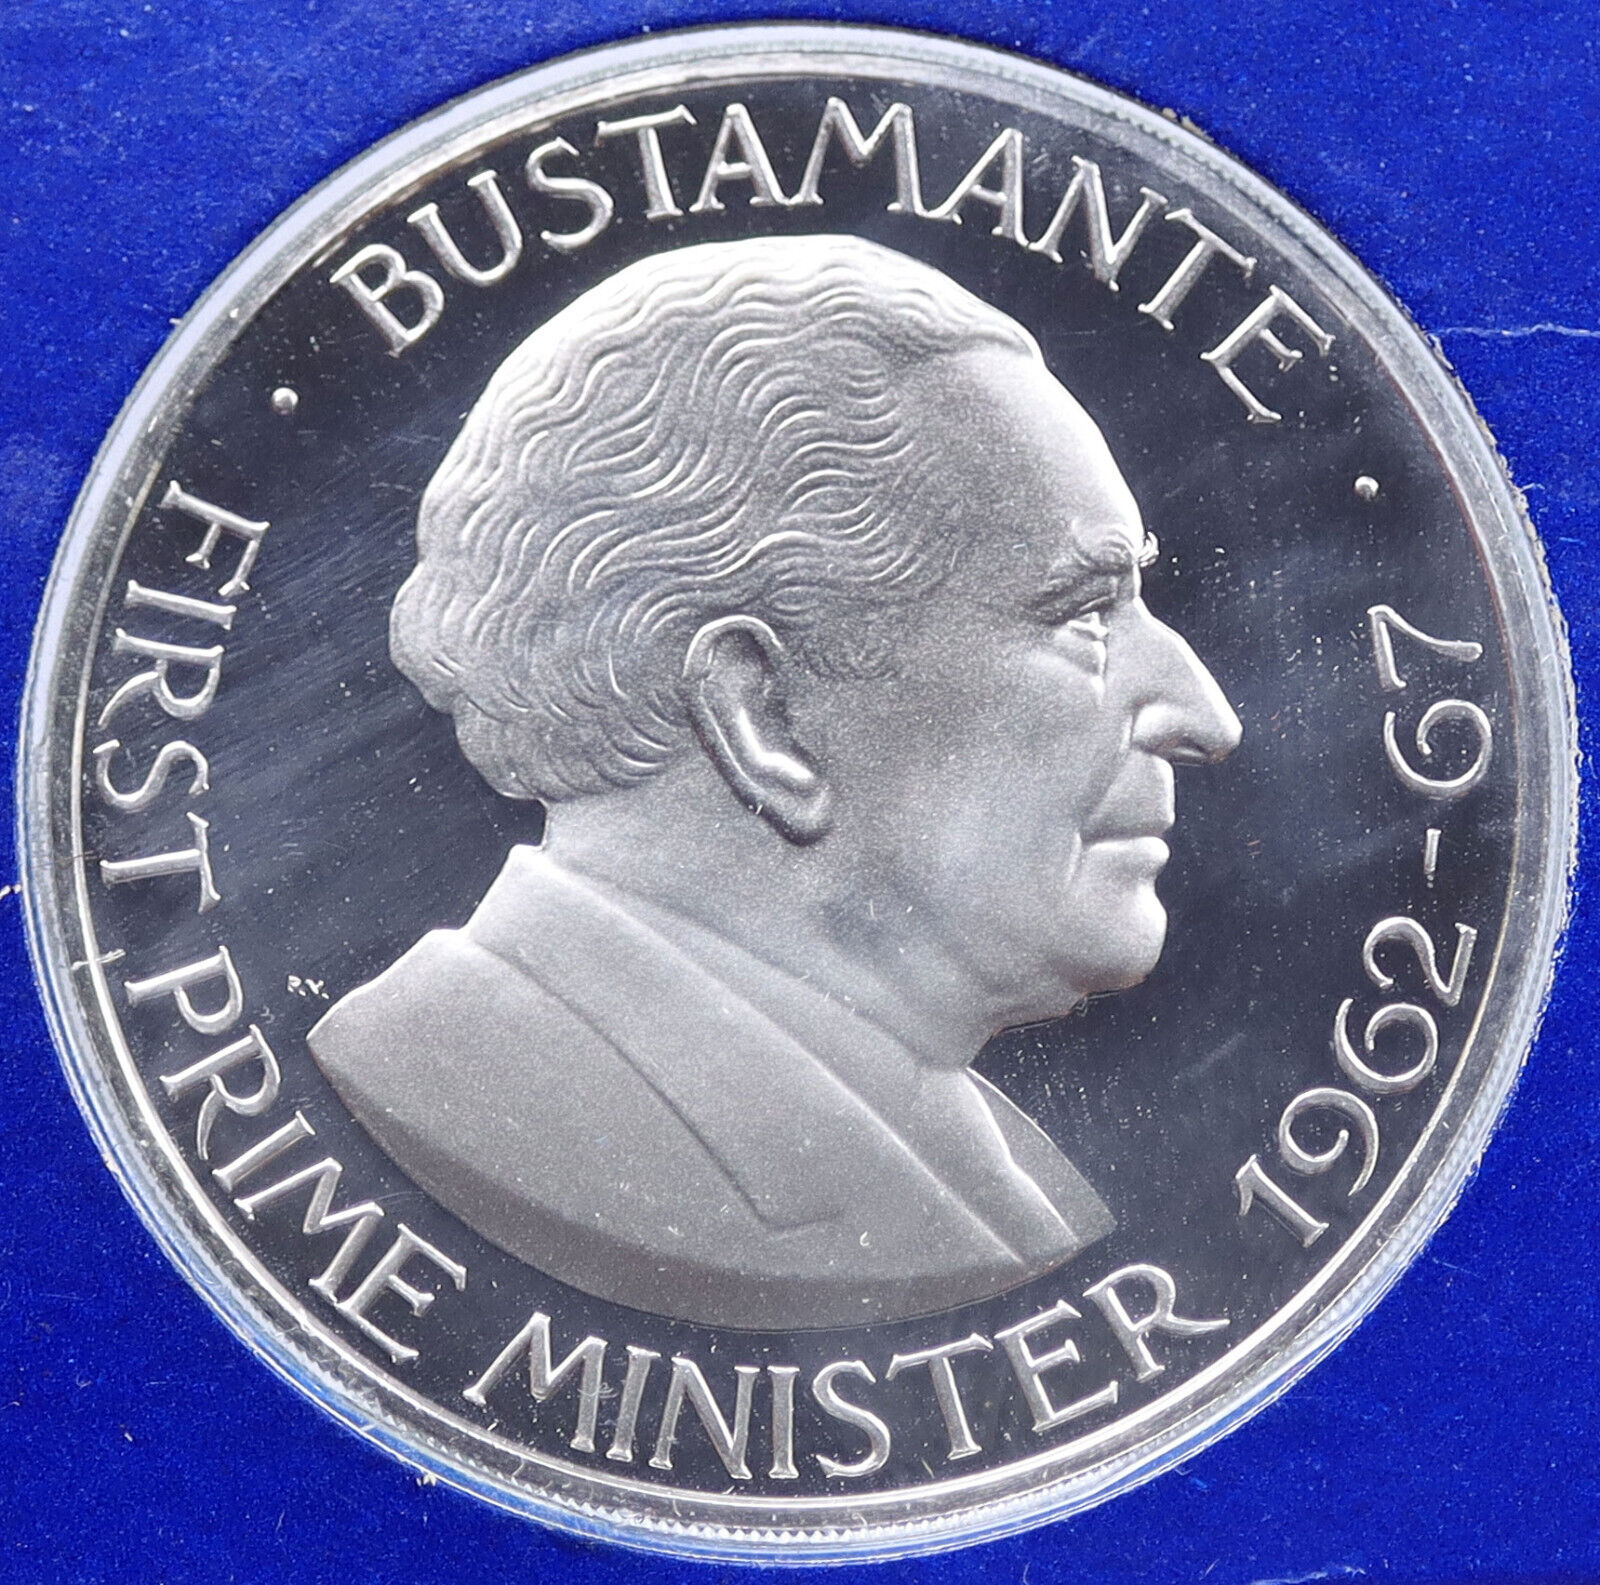 1975 JAMAICA First Prime Minister BUSTAMANTE Vintage Proof Dollar Coin i117769